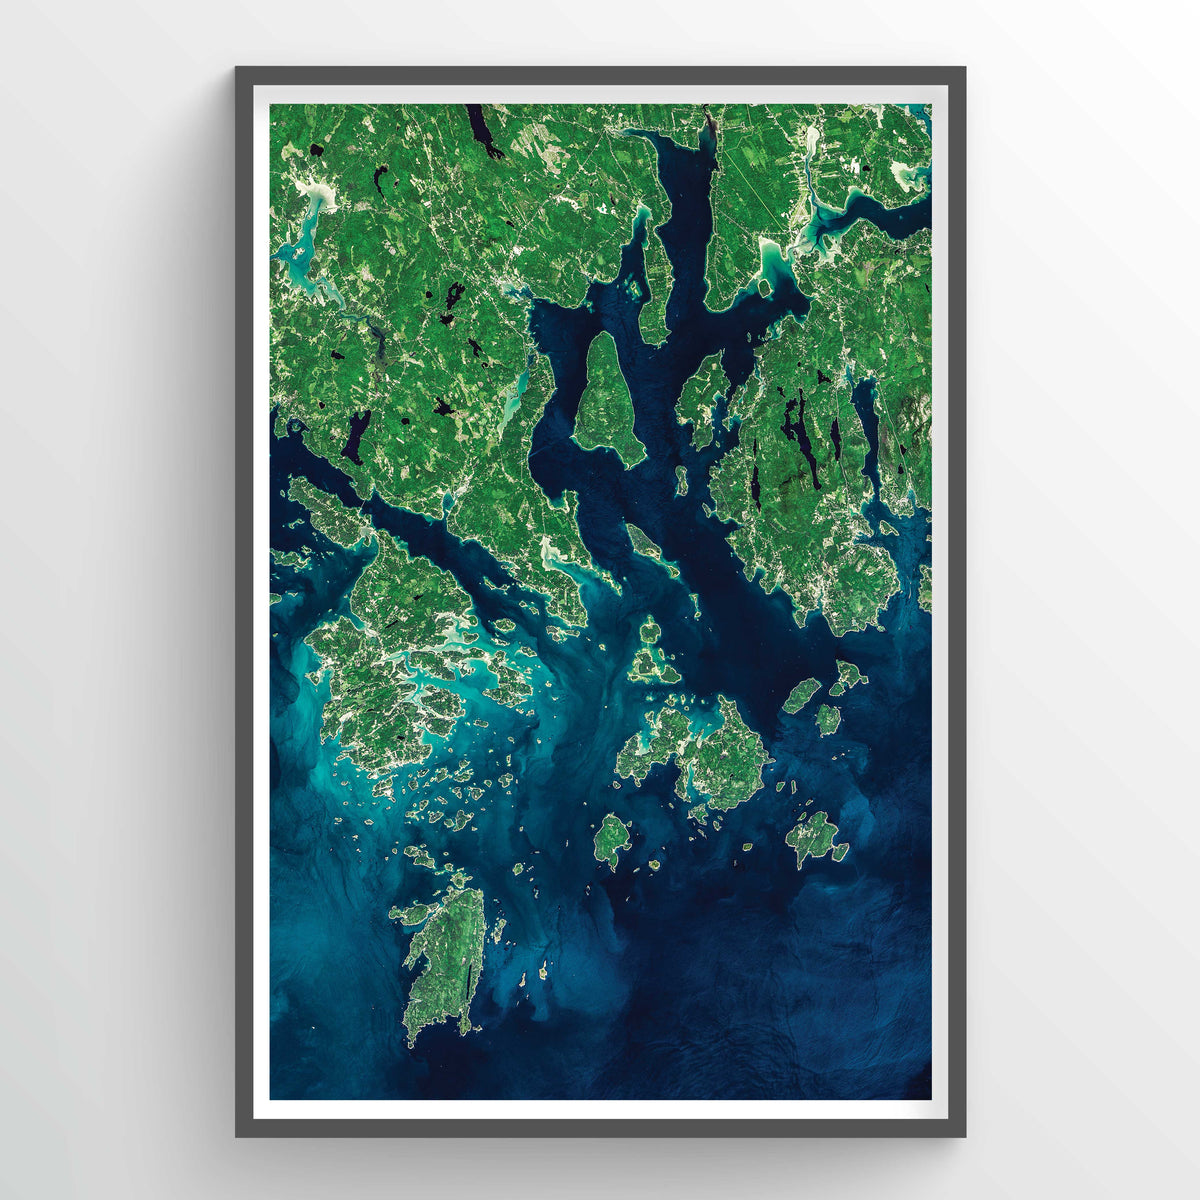 Acadia Earth Photography - Art Print - Point Two Design